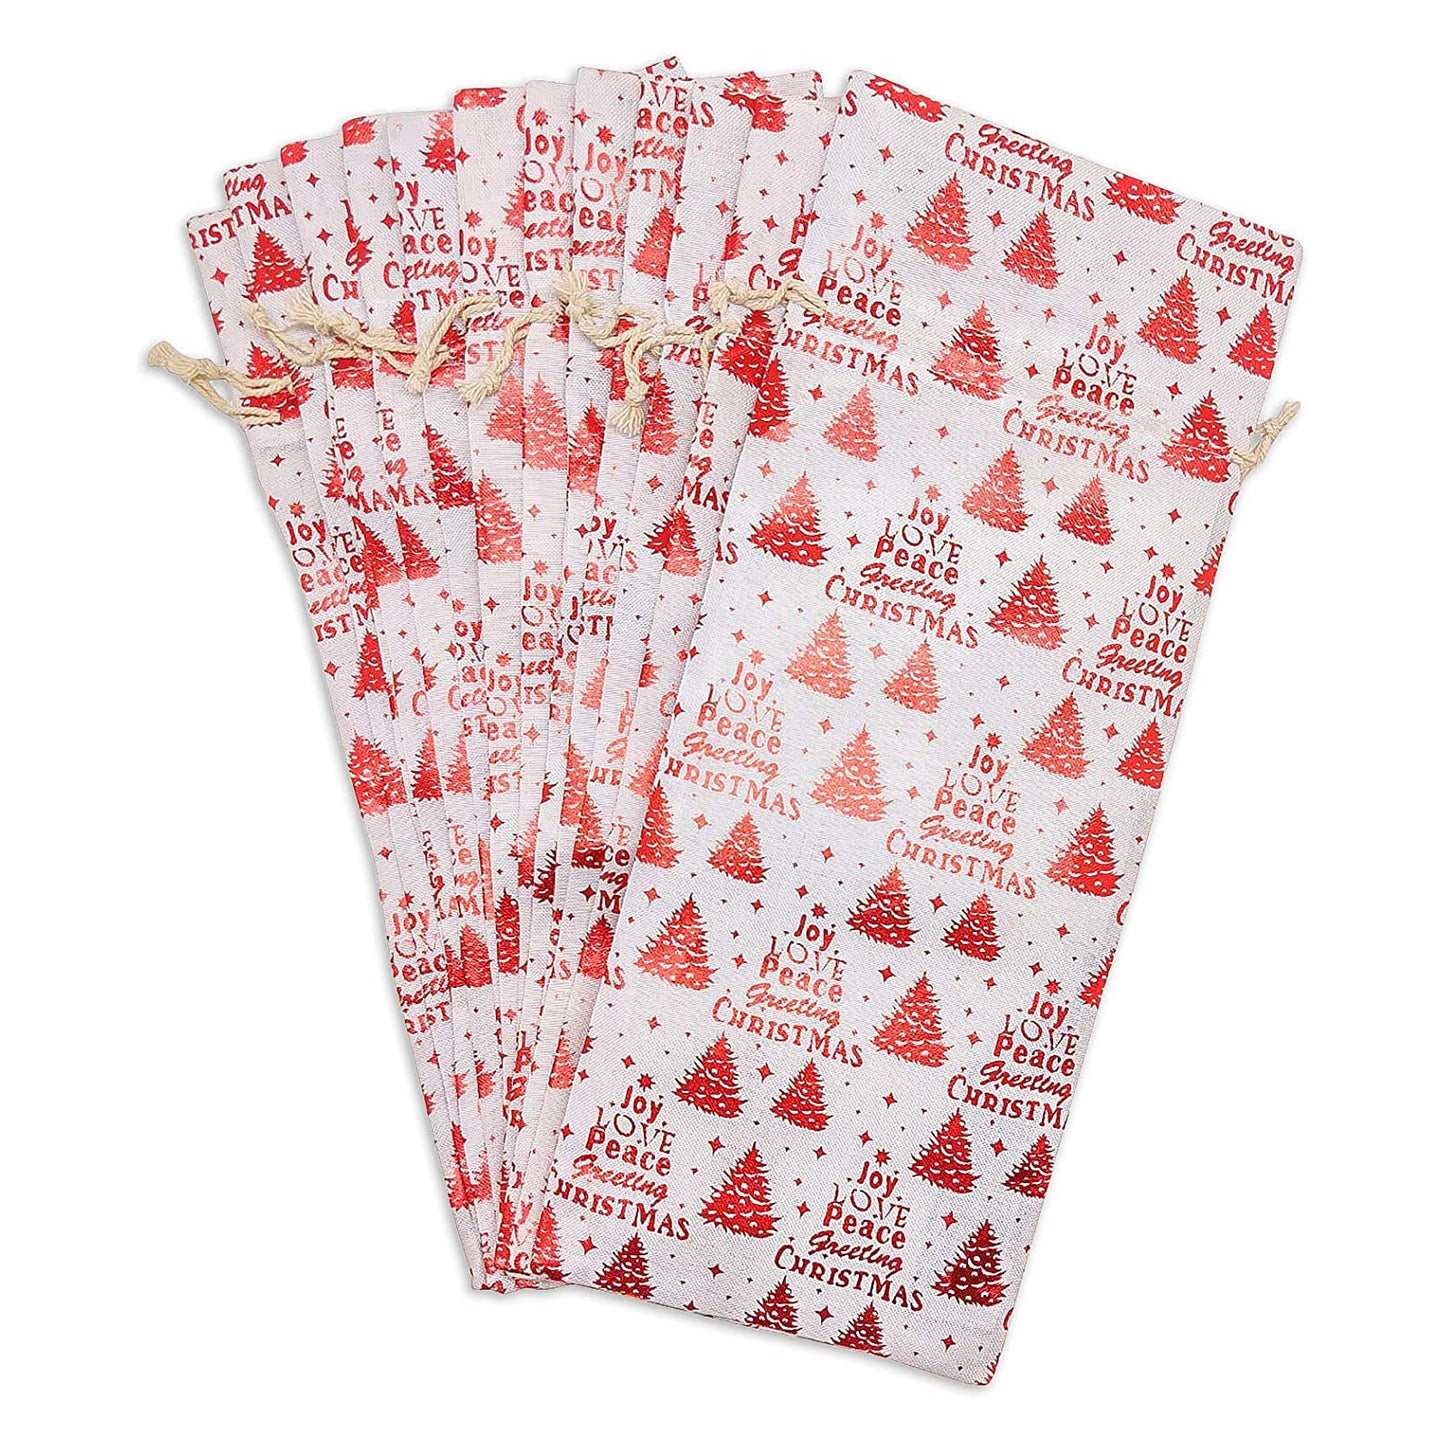 6" x 14" Cotton Muslin Red Christmas Tree Wine Bottle Drawstring Gift Bags